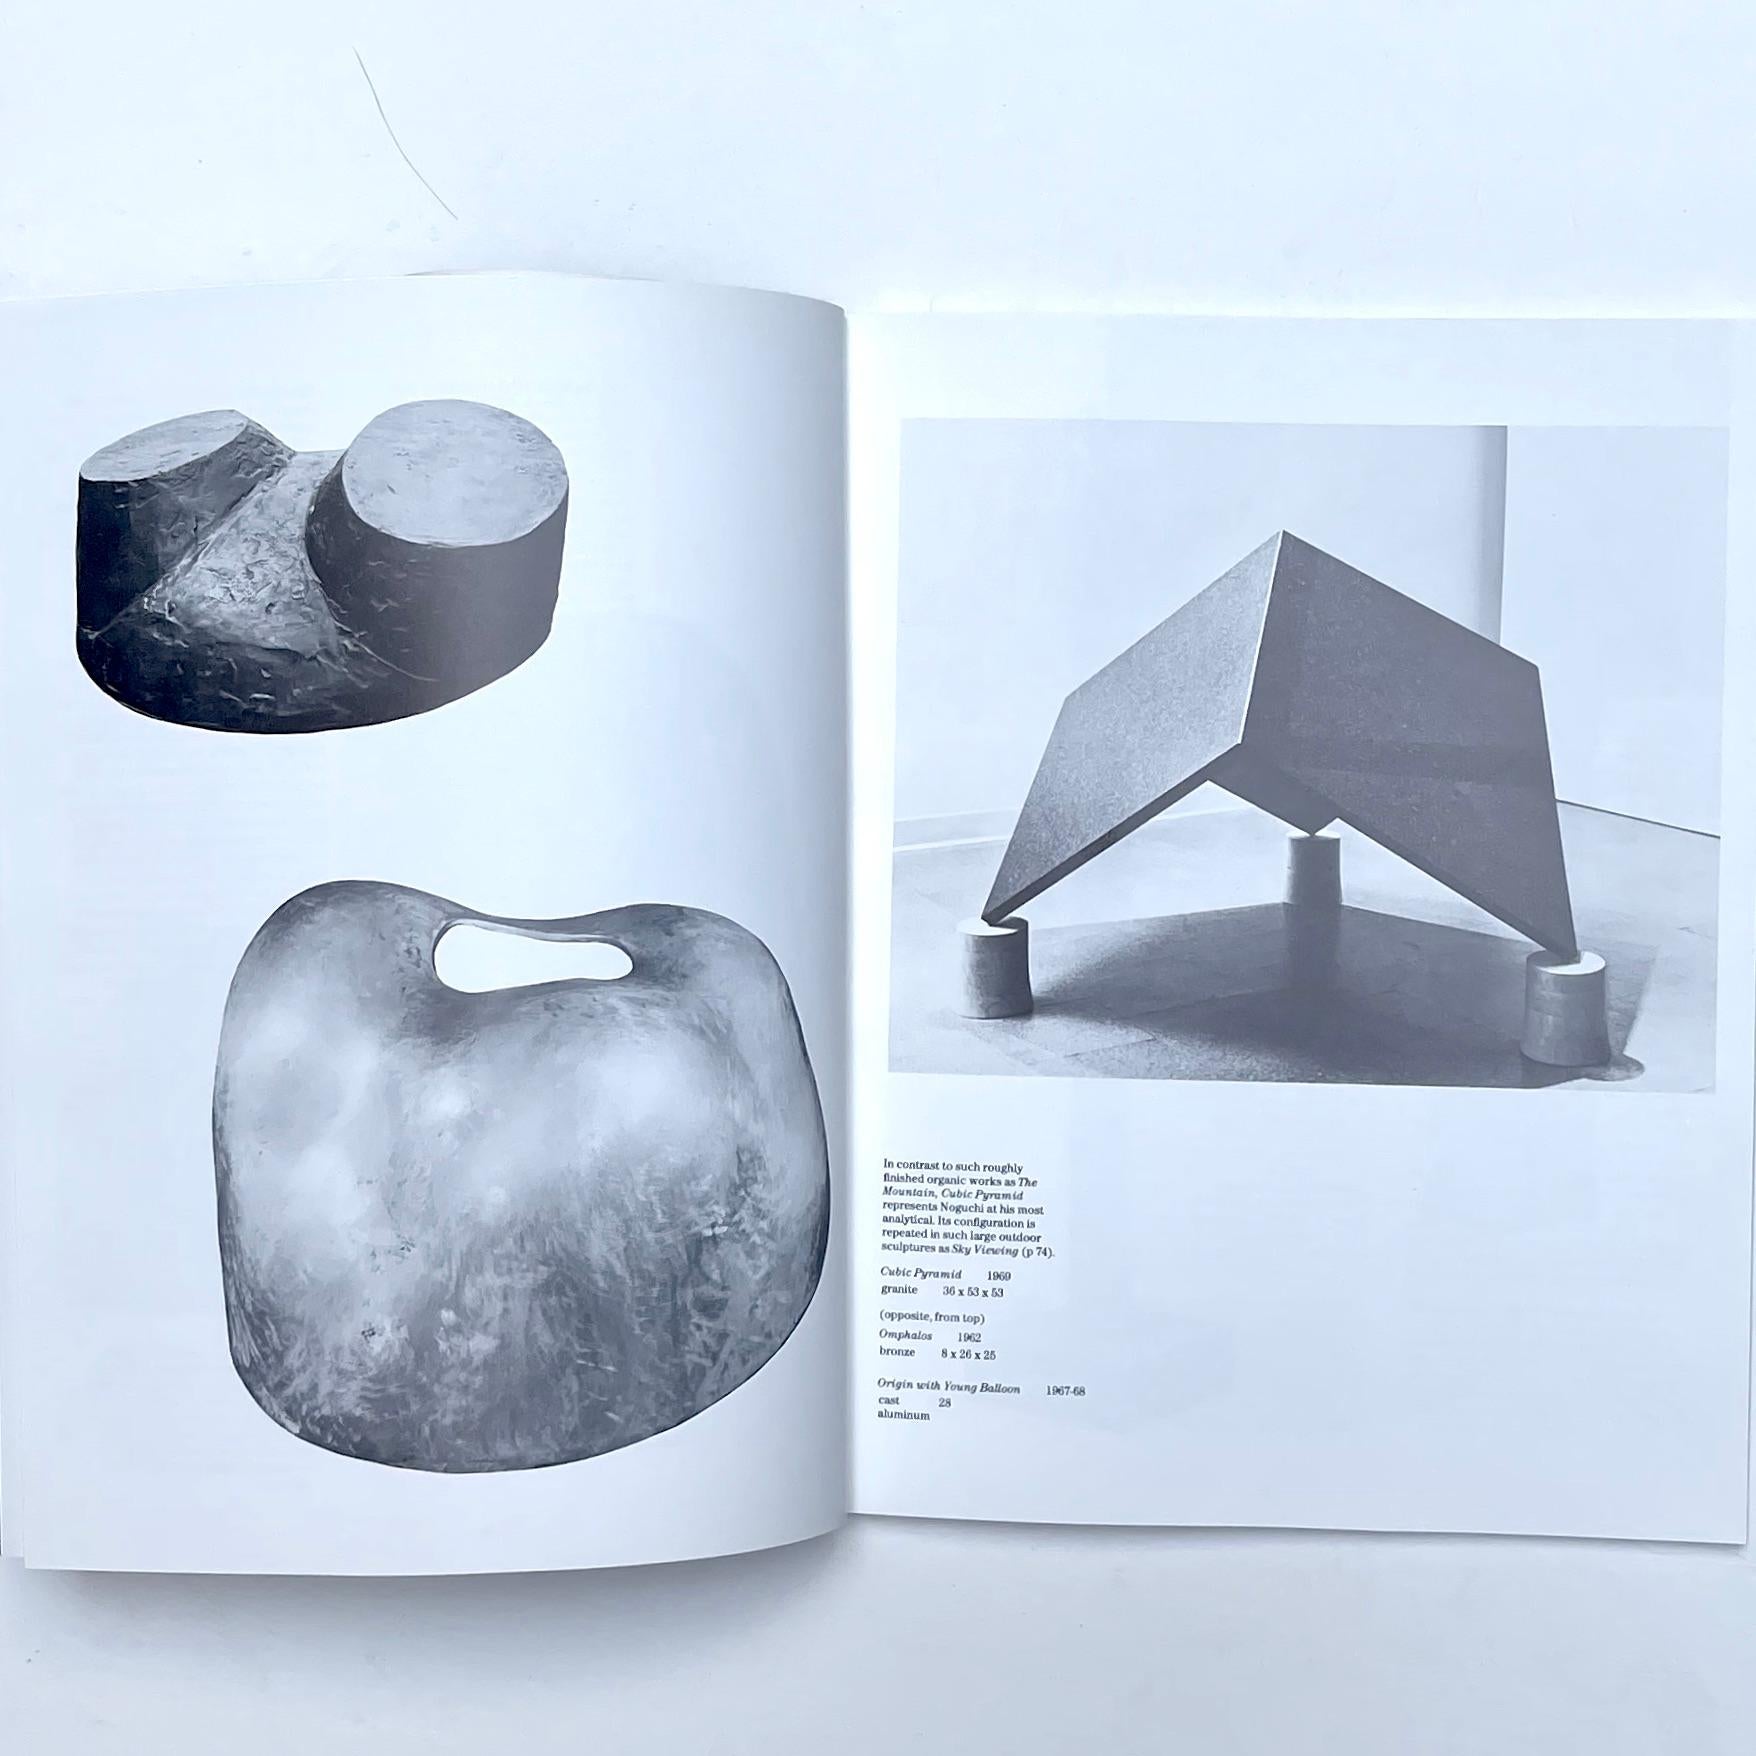 Isamu Noguchi
Noguchi's Imaginary Landscapes 
By Martin L Friedman 
Published by the Walker Art Center, New York, 1978. Hardback in dust jacket. First Edition.

Exhibition catalogue published in conjunction with show held at the Walker Art